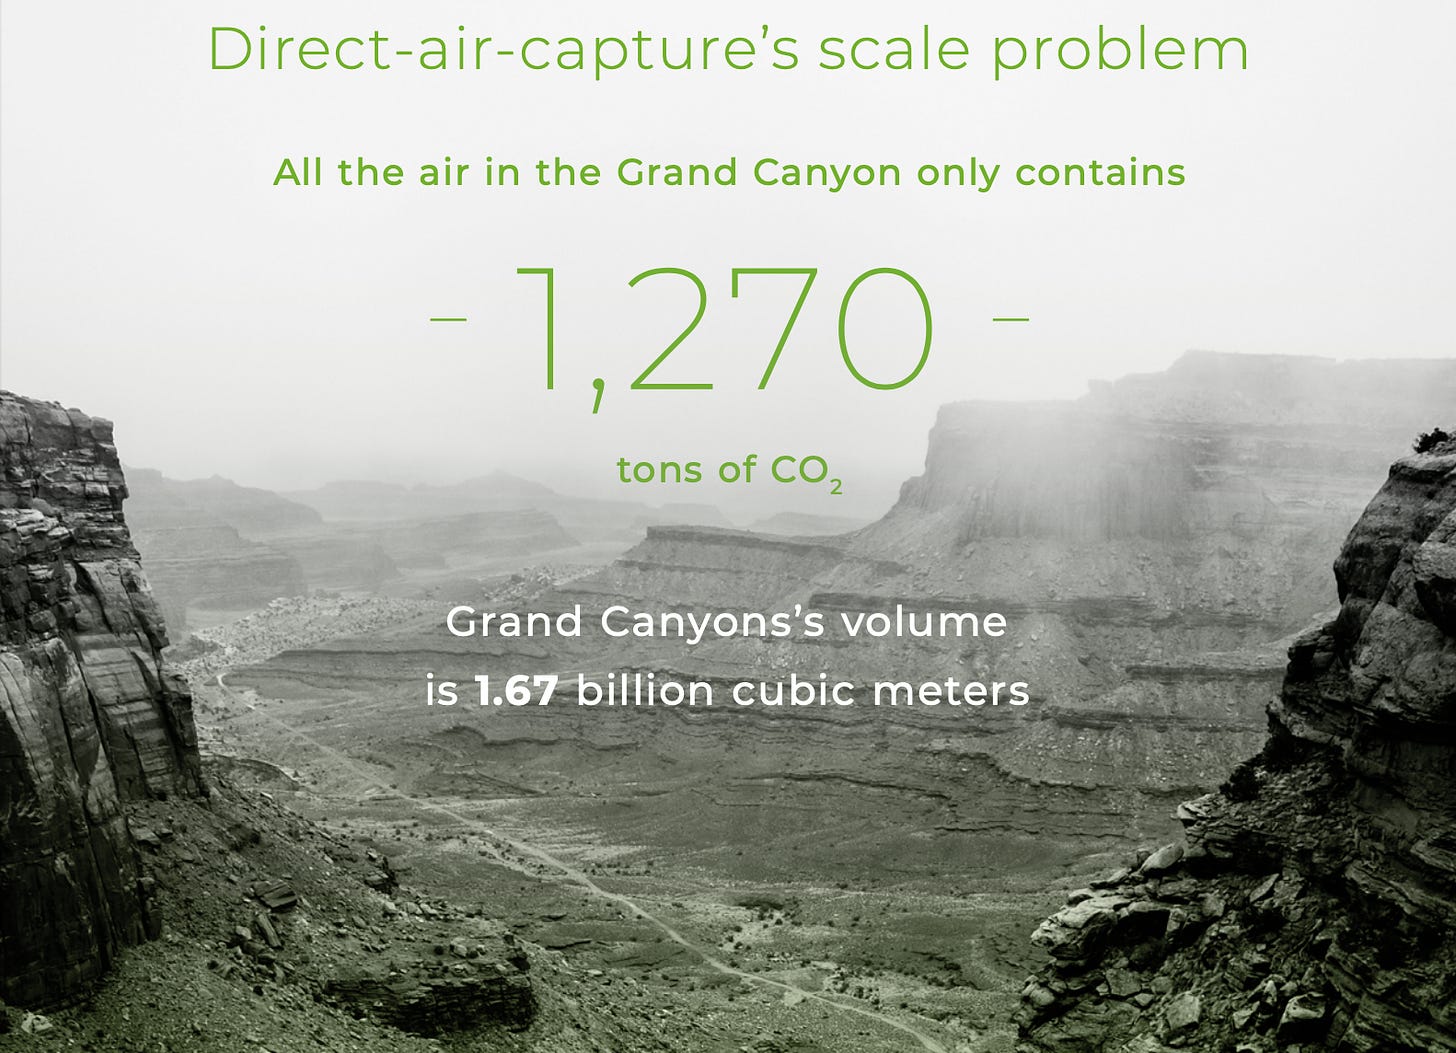 Direct air capture's scale problem illustrated by Grand Canyon ony having 1,270 tons of CO2 in all of the air in it